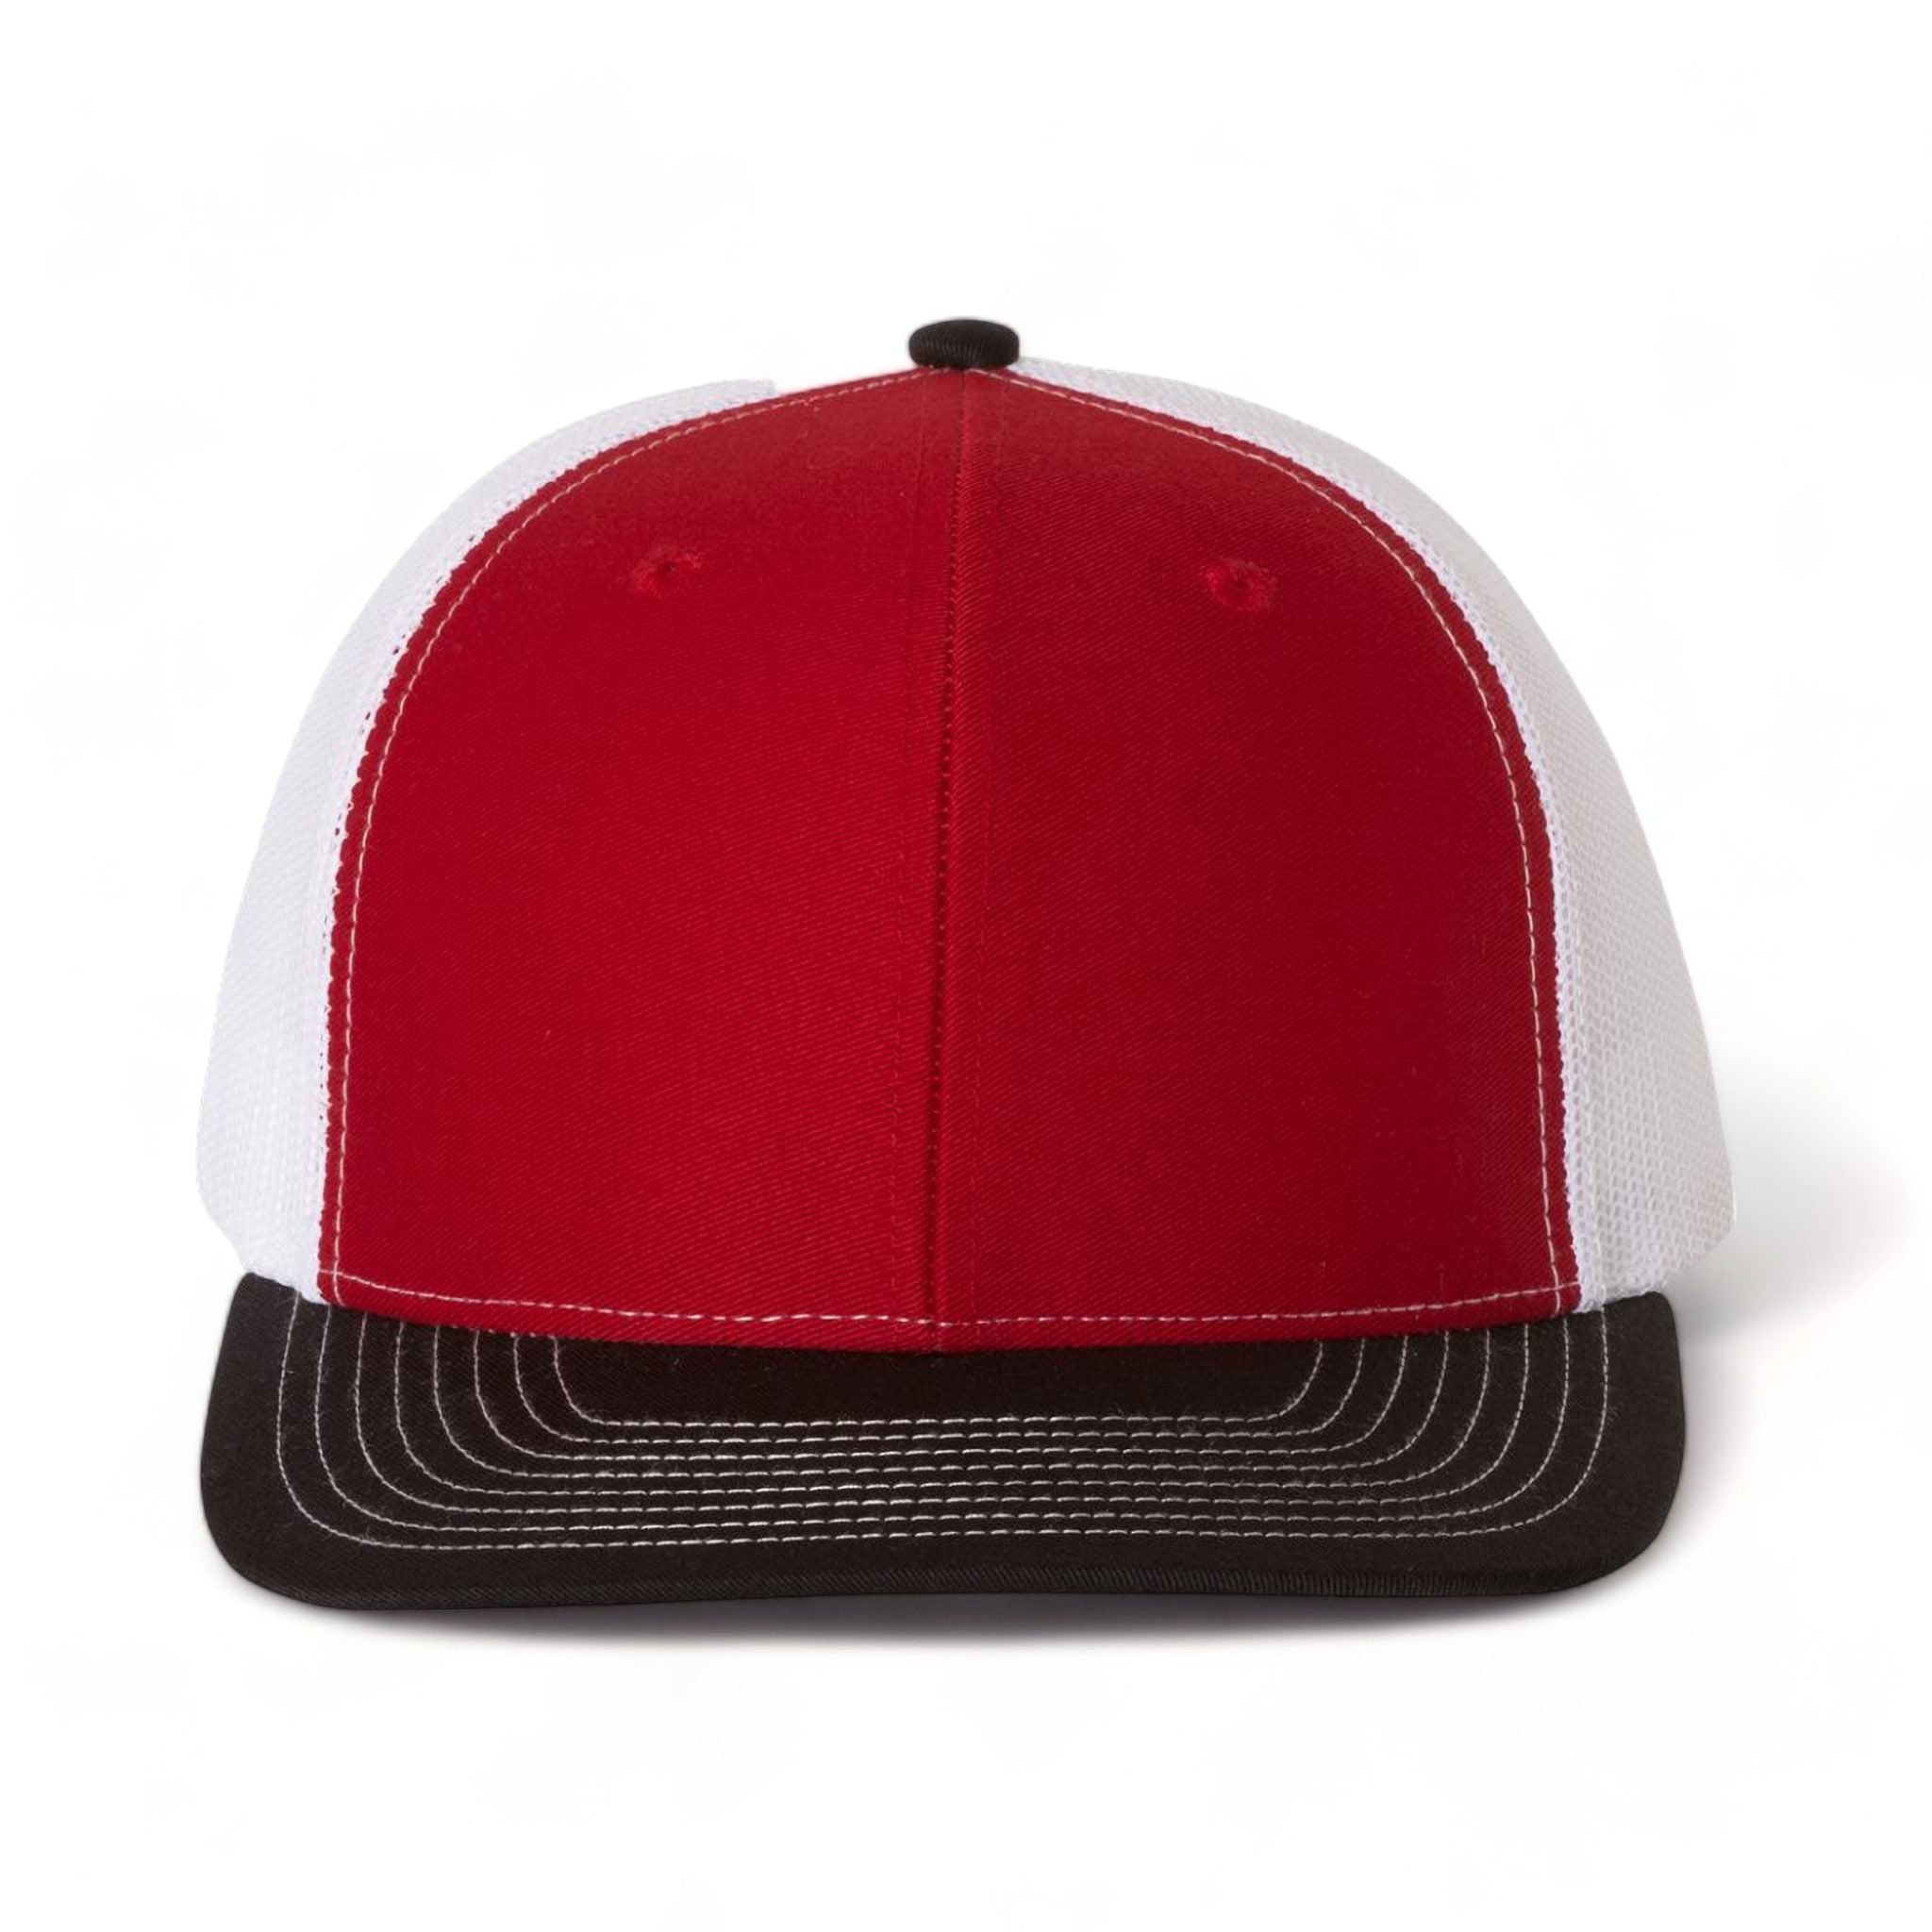 Front view of Richardson 112 custom hat in red, white and black